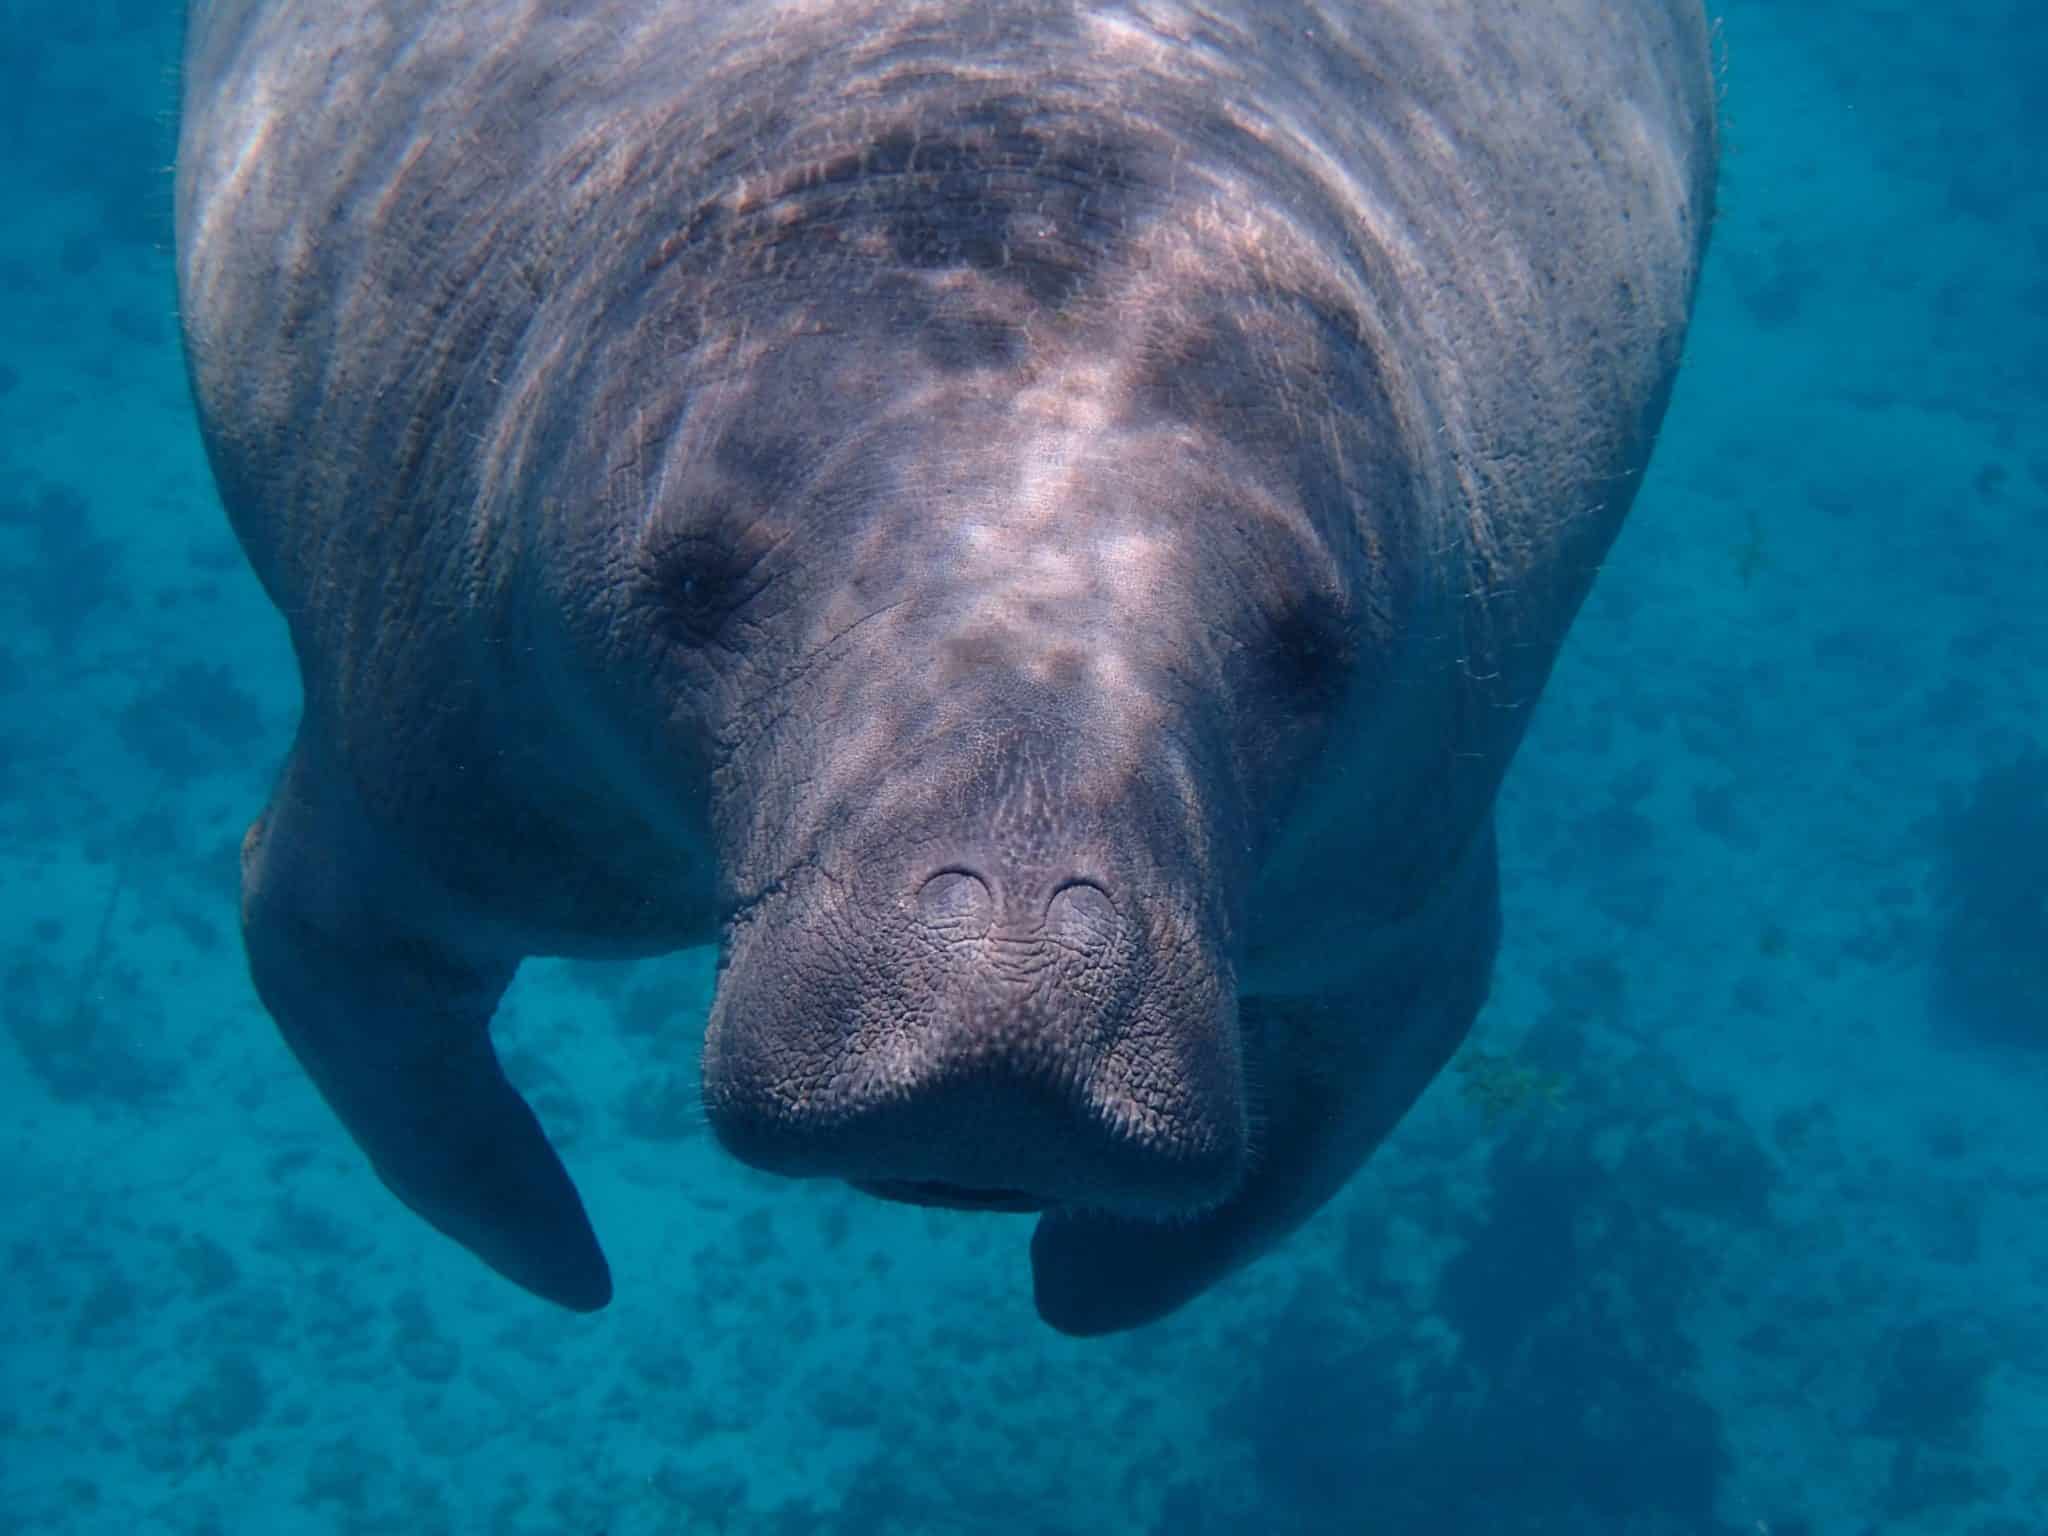 A manatee in clear water.